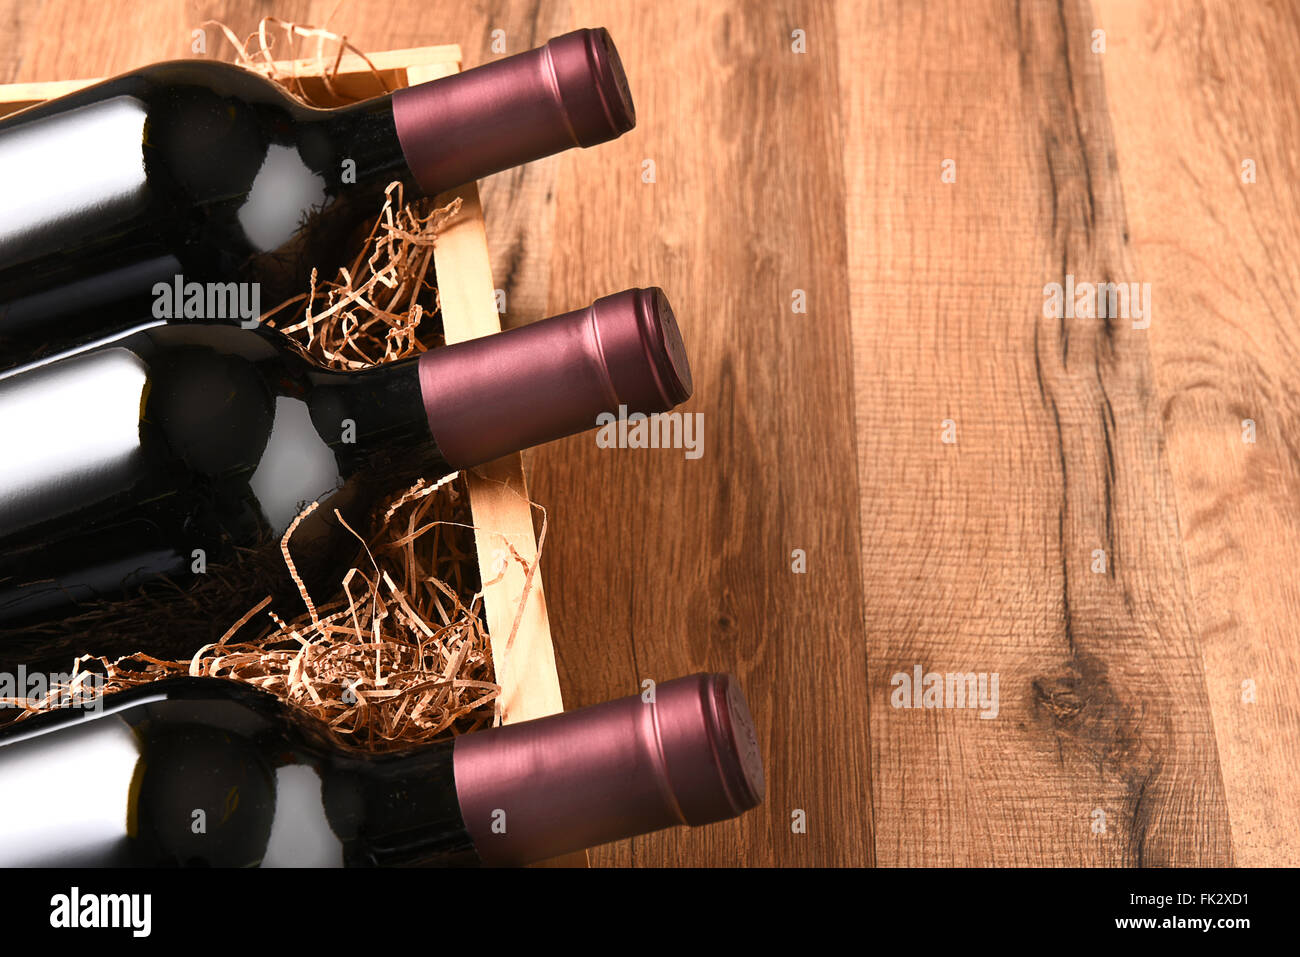 High angle view of a crate of wine bottles on a wood table with copy space. Stock Photo